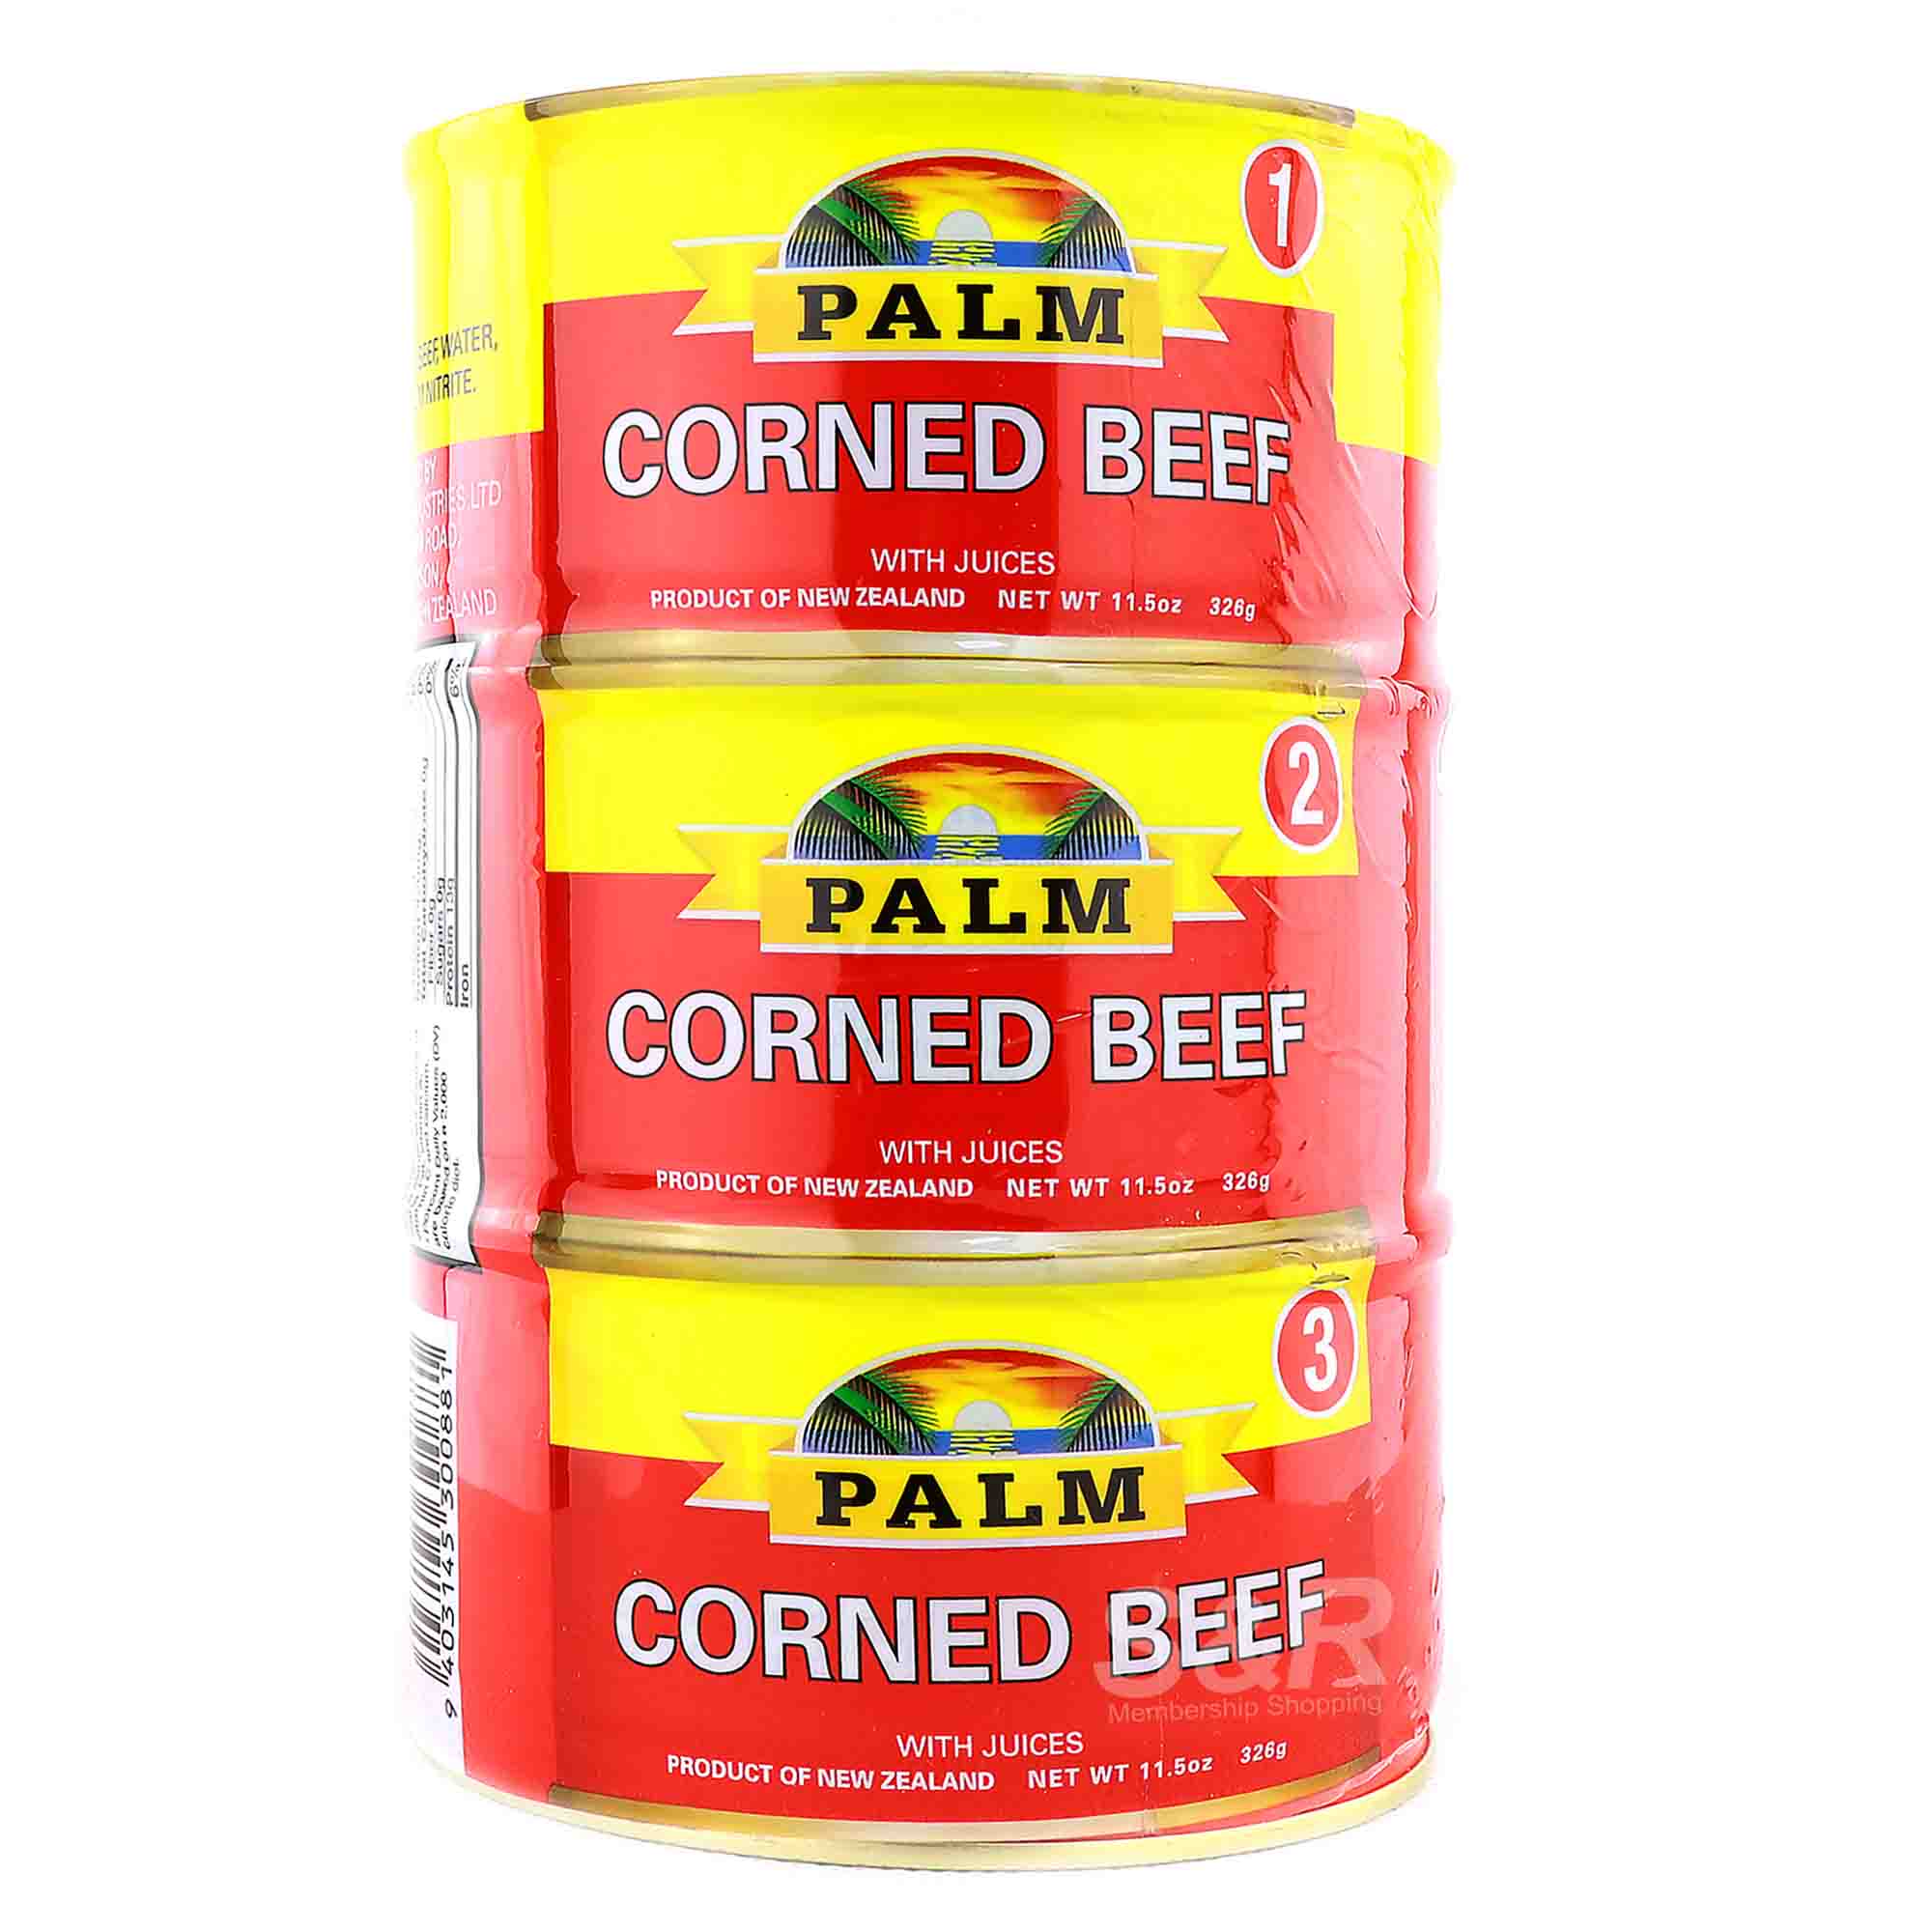 Palm Corned Beef with Juices 3 cans